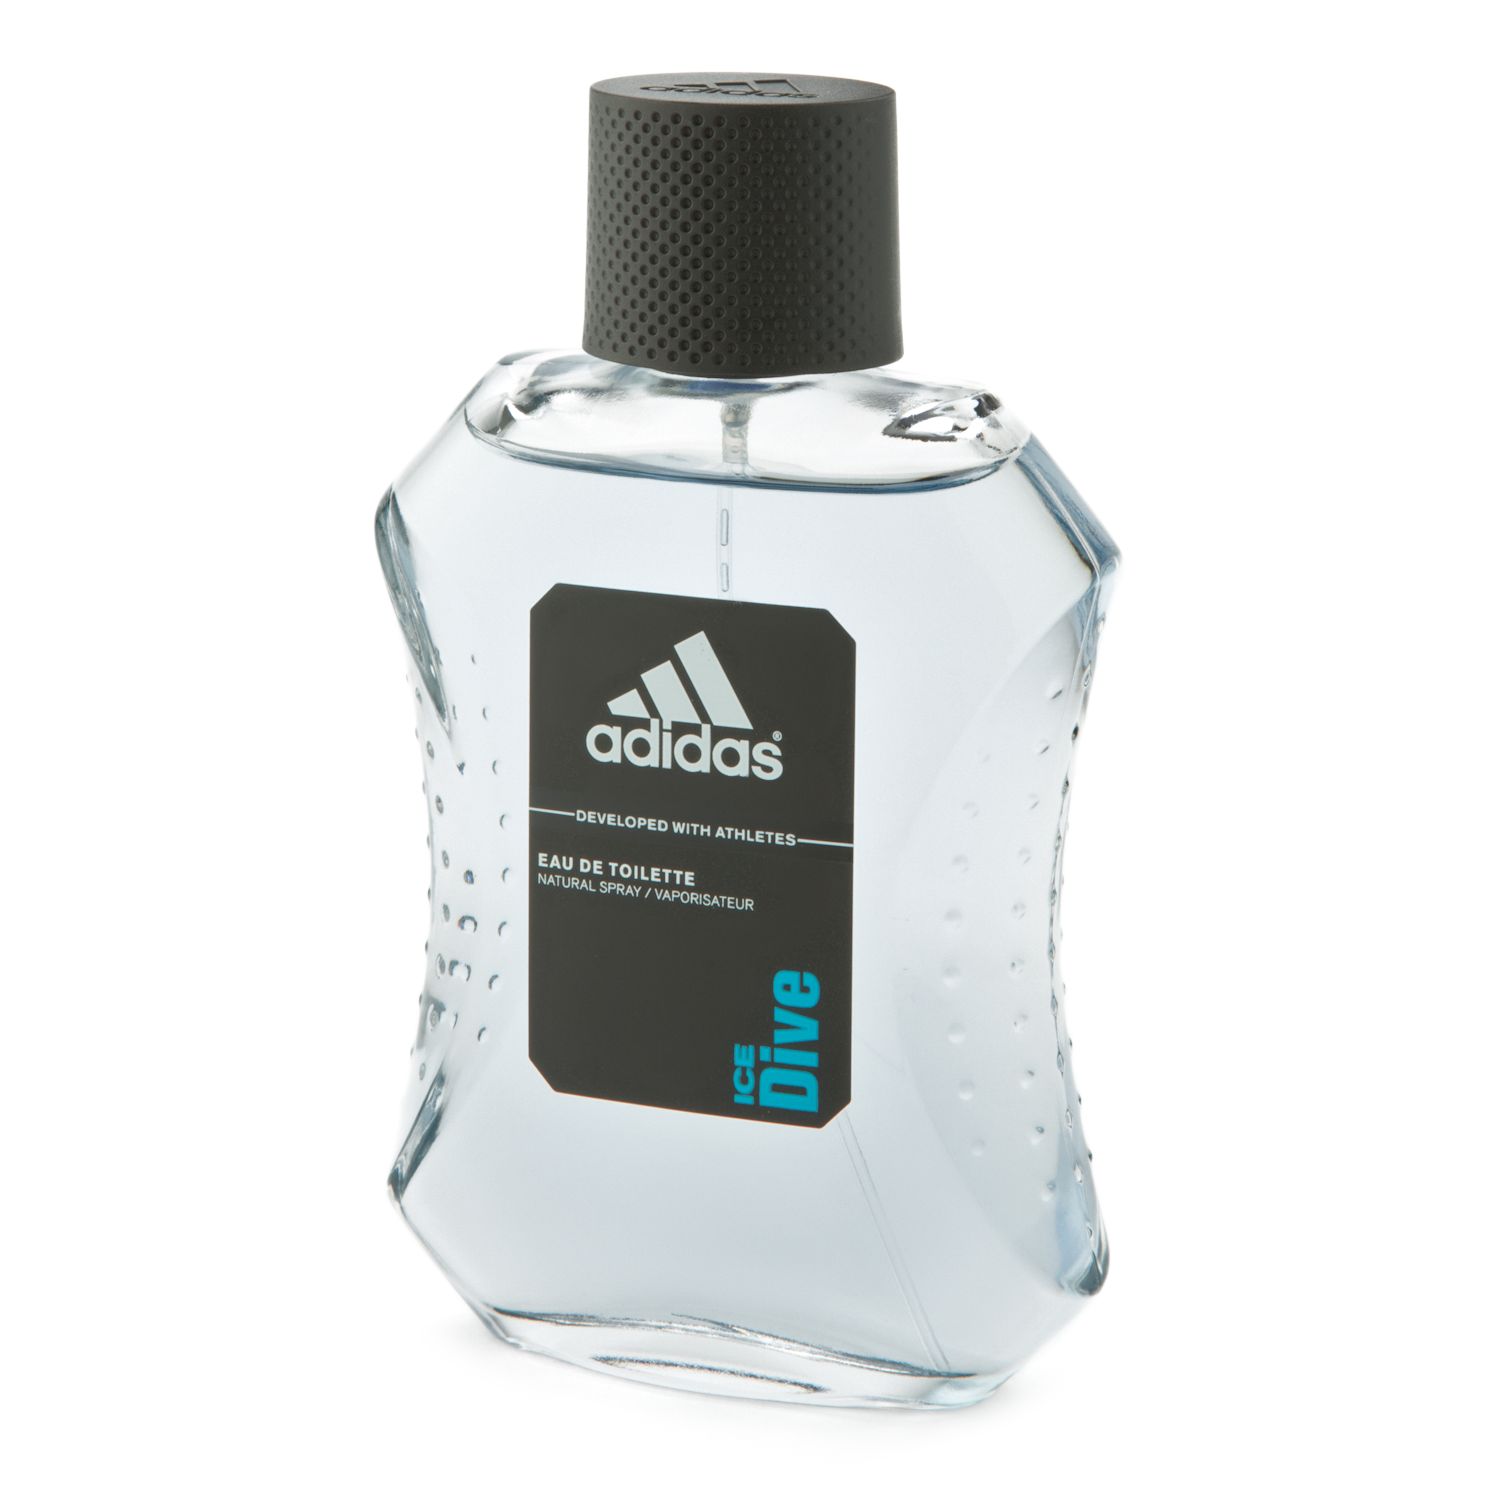 adidas ice dive cologne